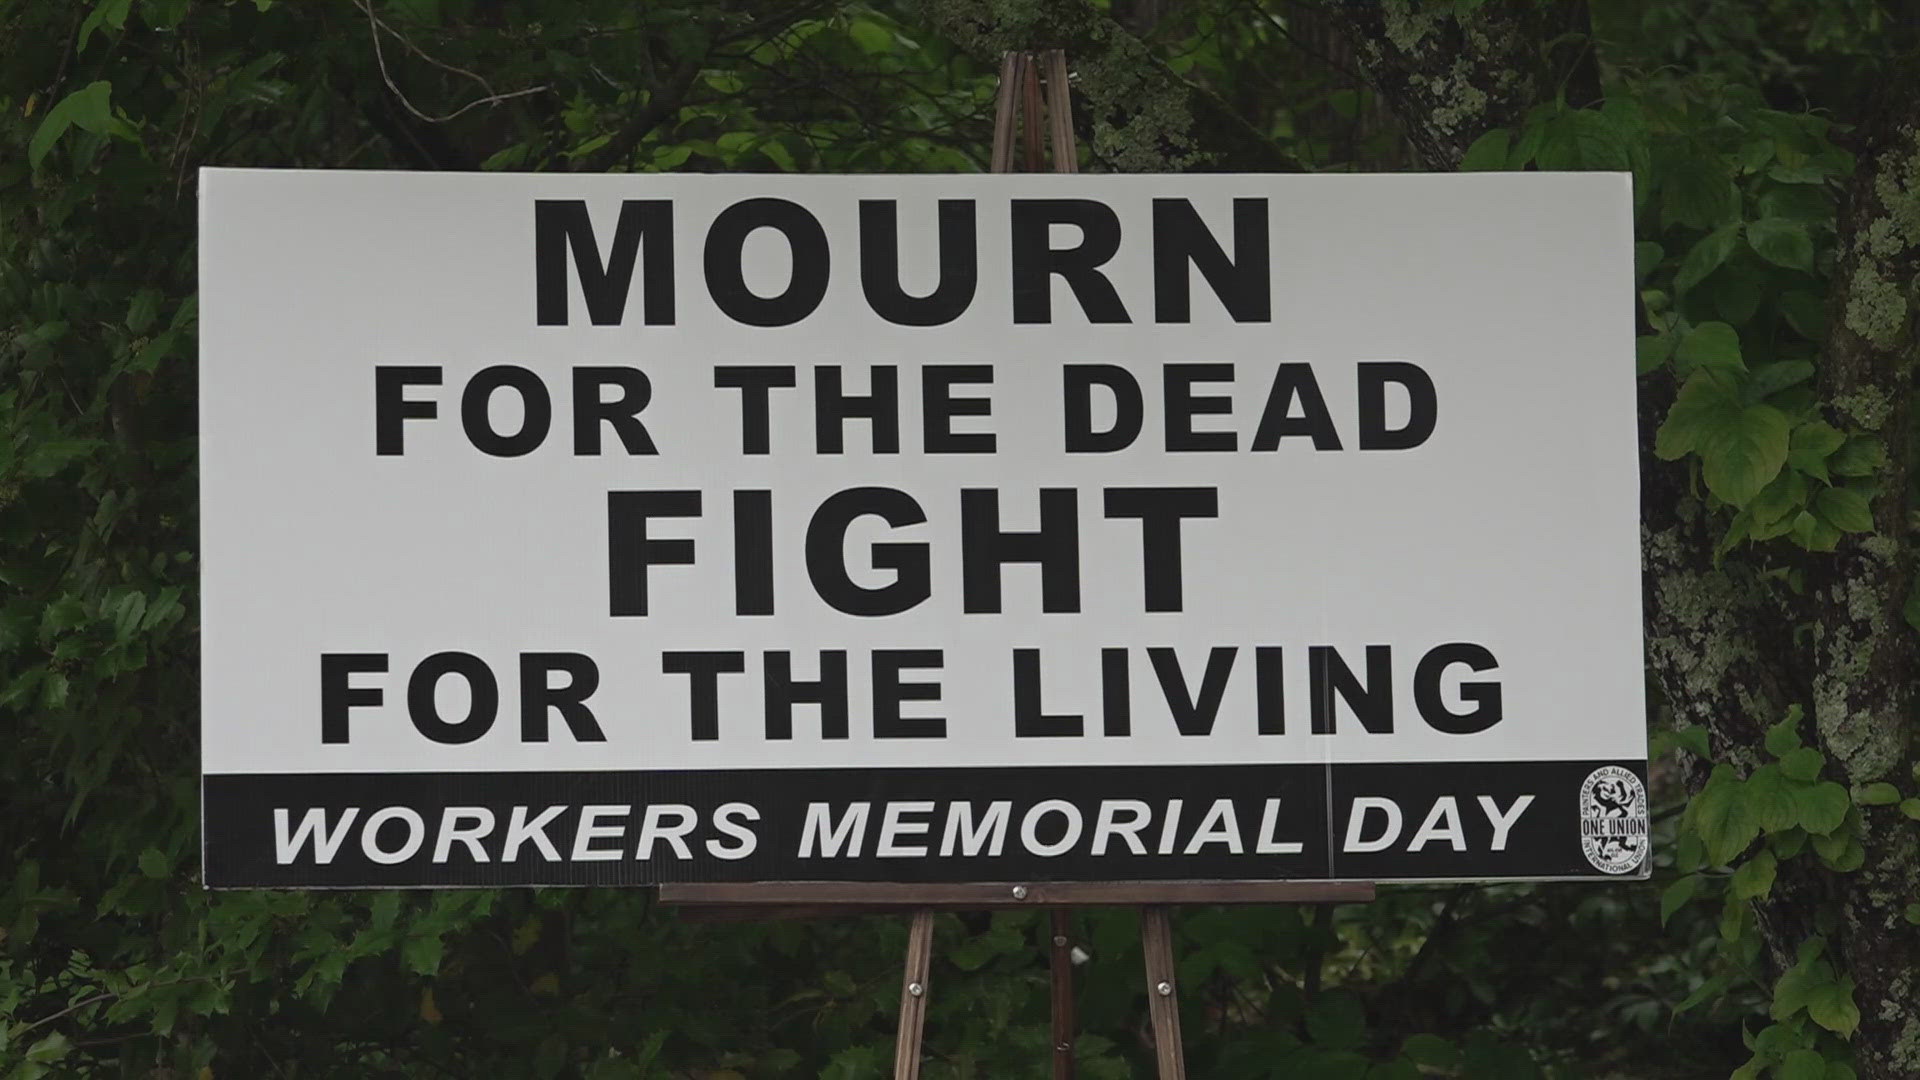 The annual Worker's Memorial Day service for Knoxville was held Saturday at Westminster Presbyterian Church.